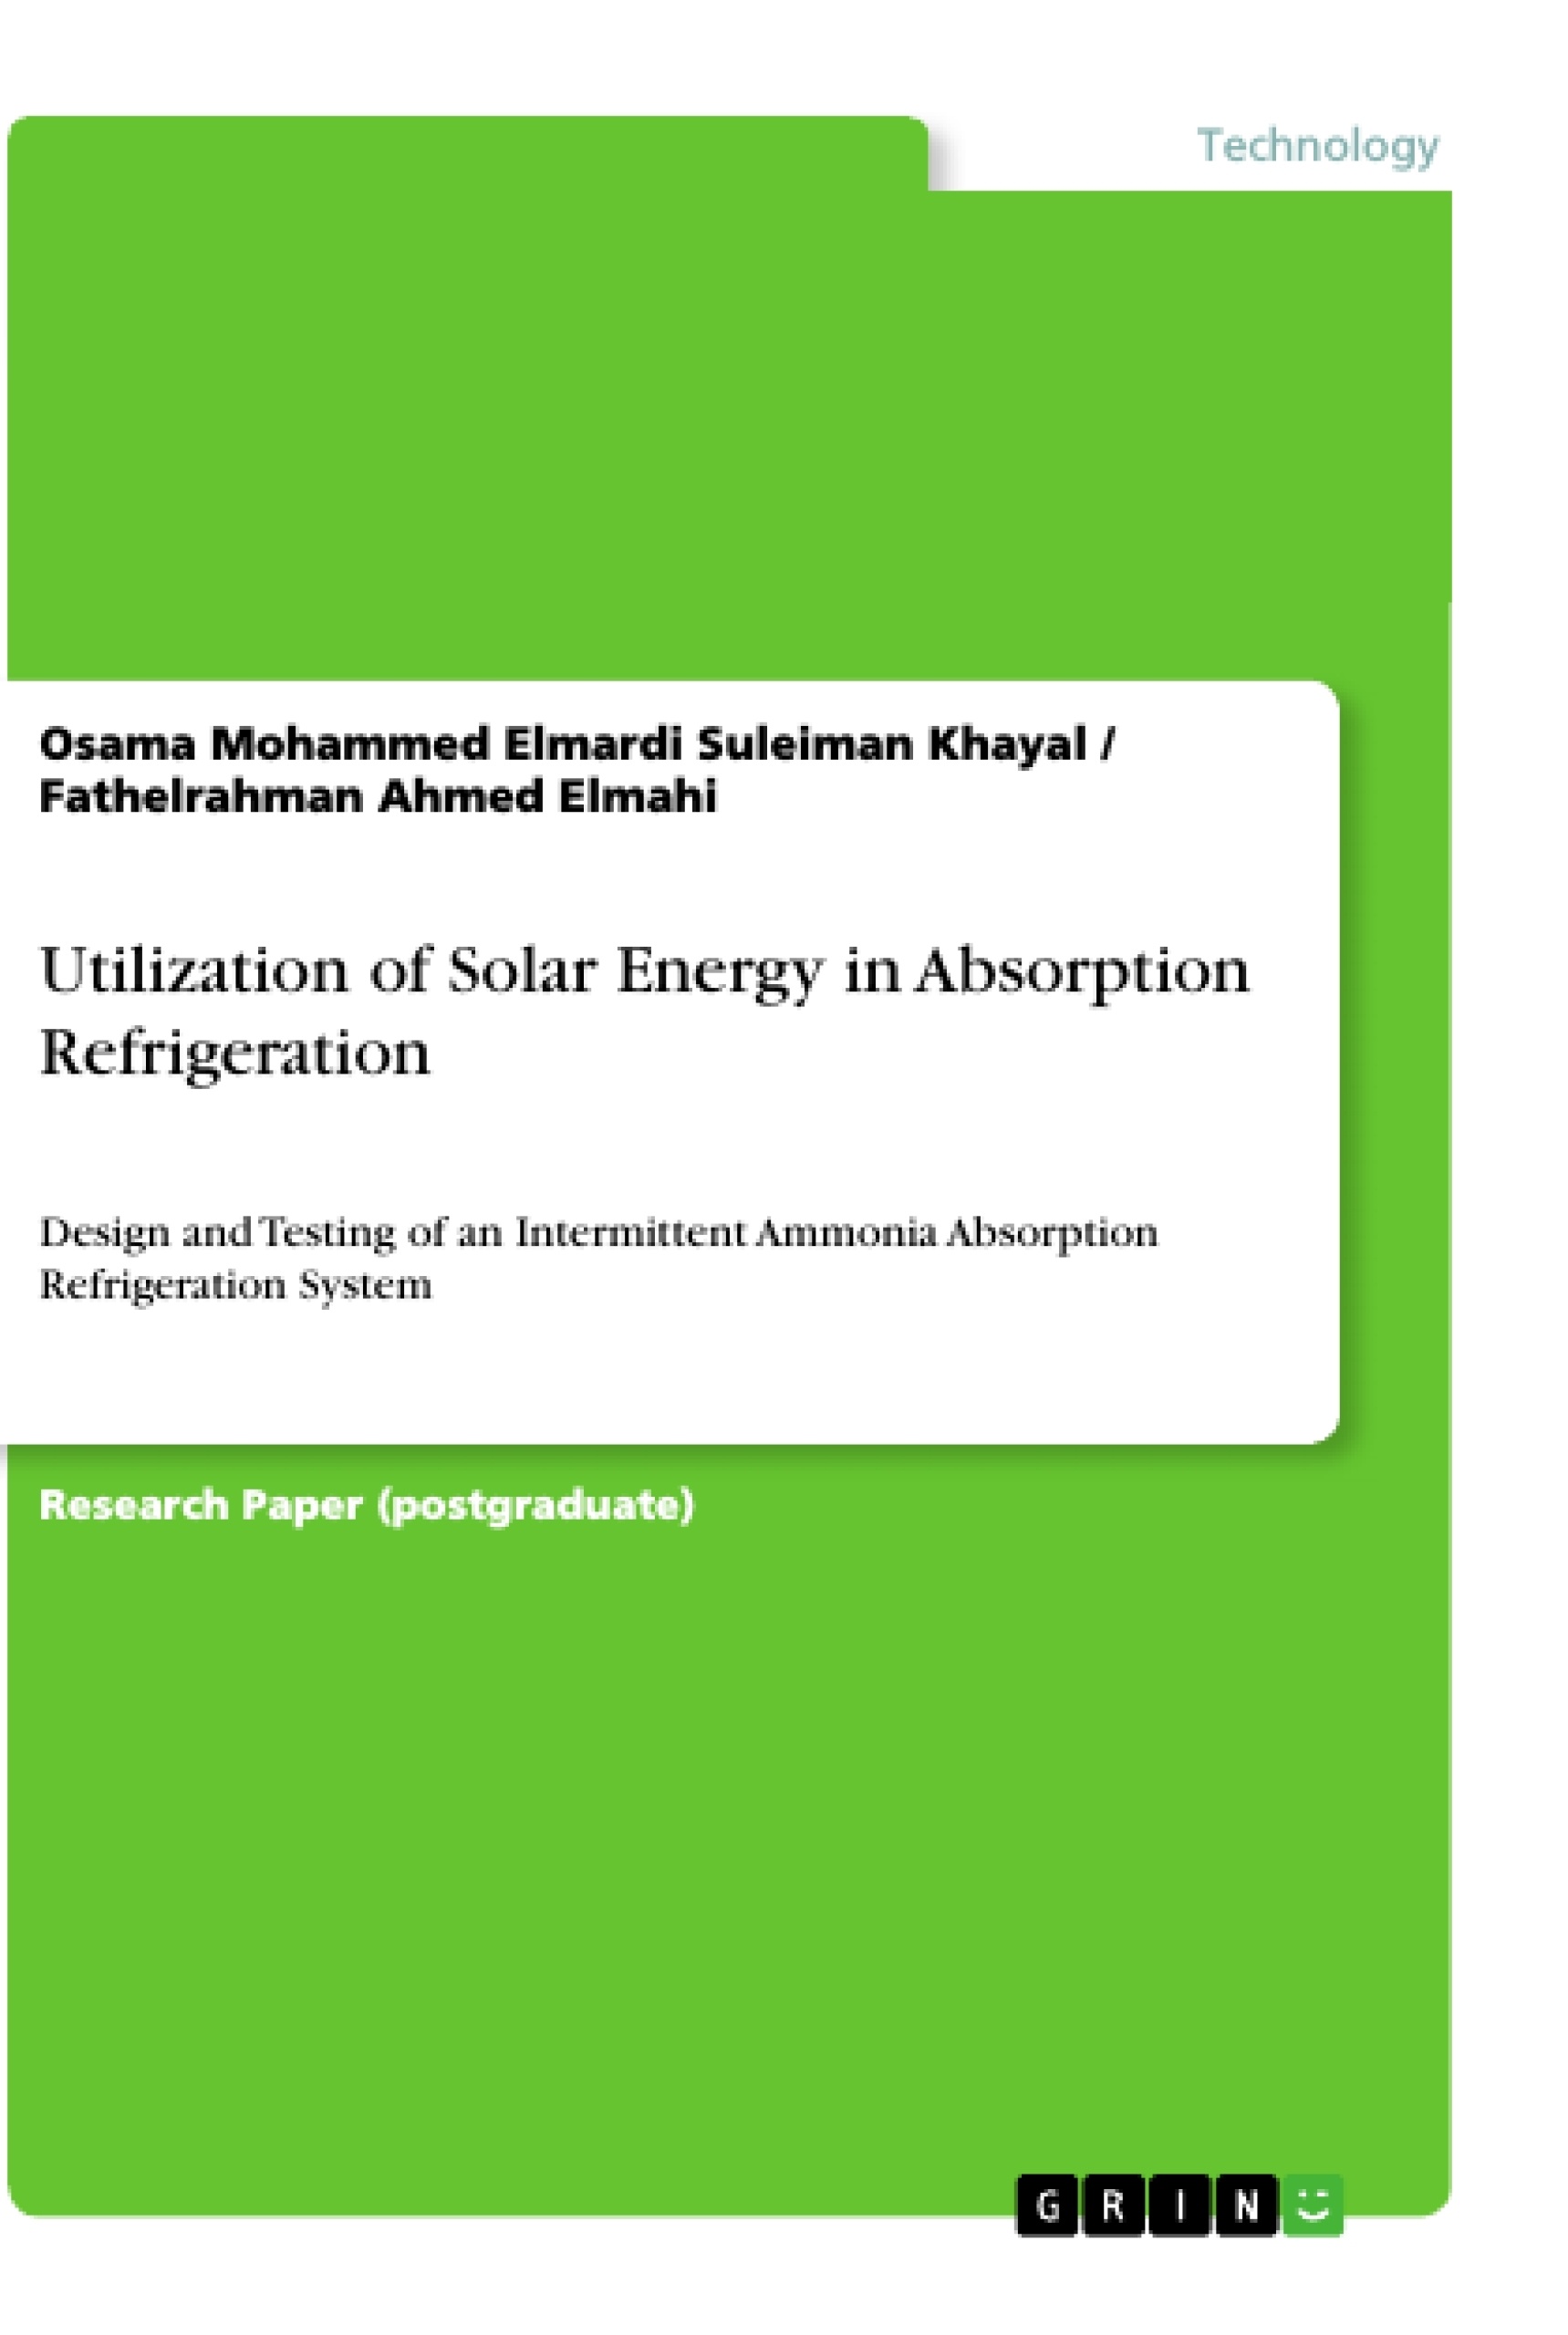 Titre: Utilization of Solar Energy in Absorption Refrigeration